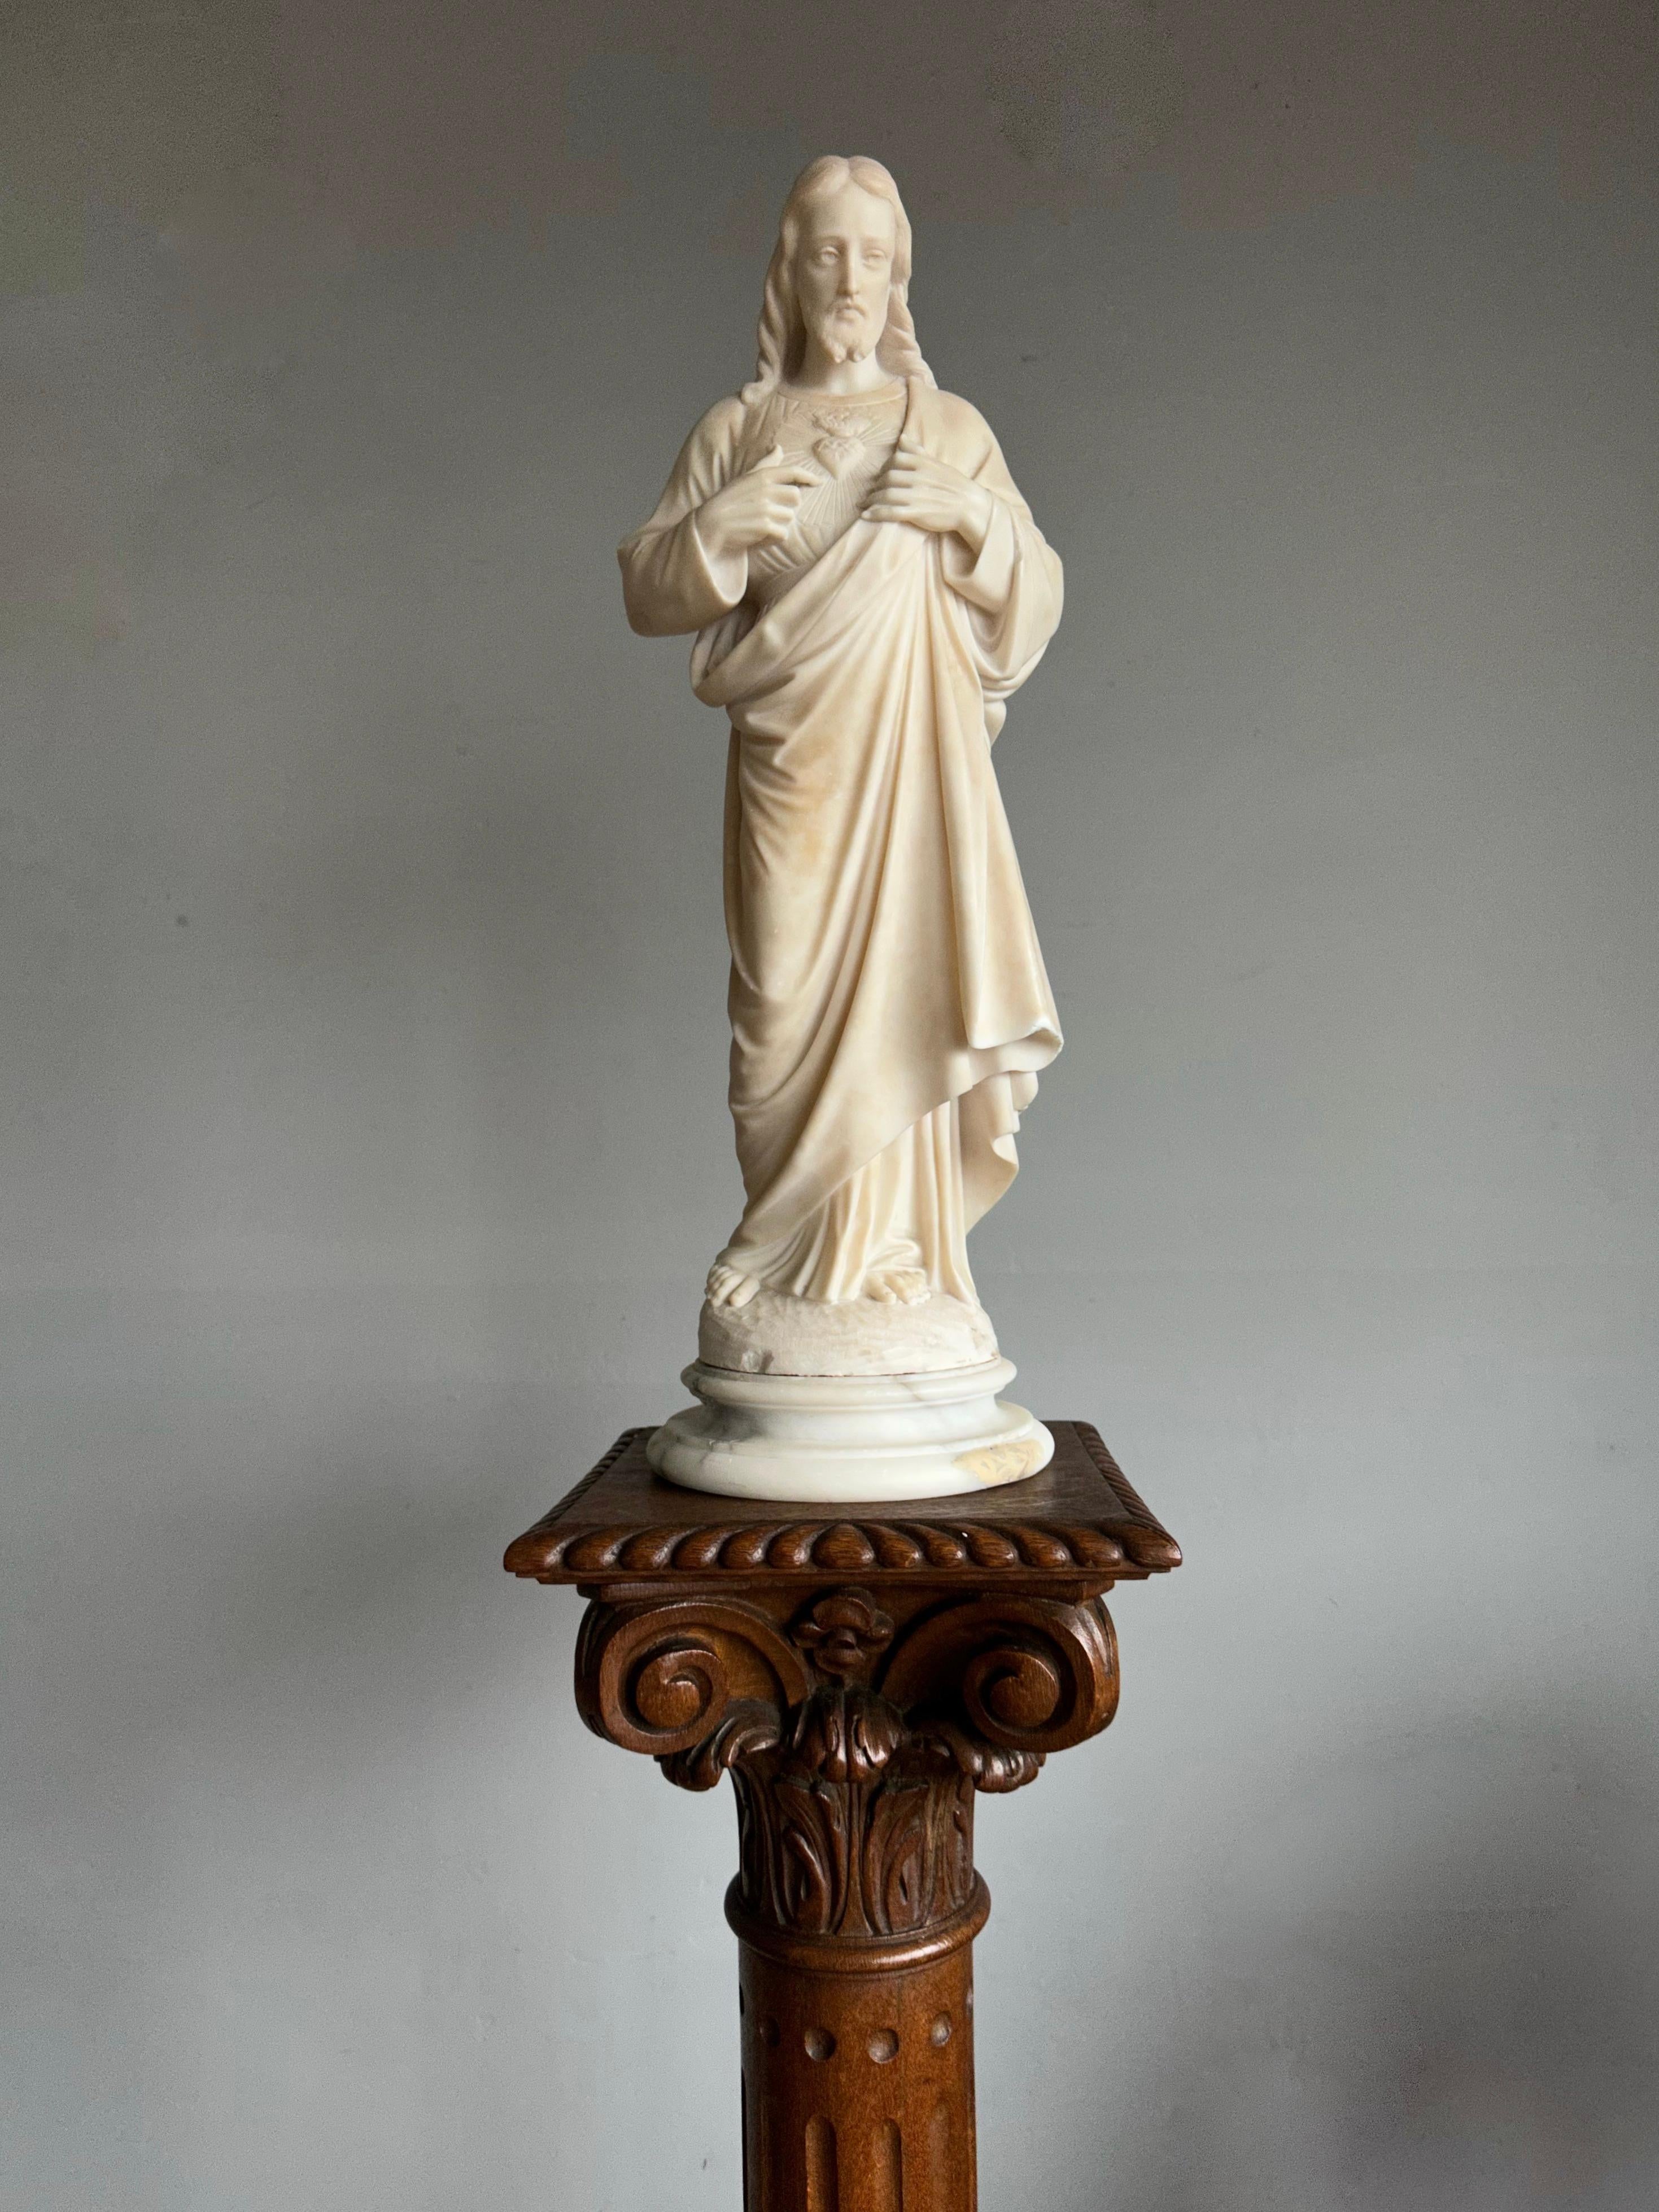 Sttunning and meaningful work of religious art.

This skillfully hand carved and large size Sacred Heart of Christ statue is another one of our recent great finds. In our view the sculptor has perfectly managed to capture both the wisdom and the